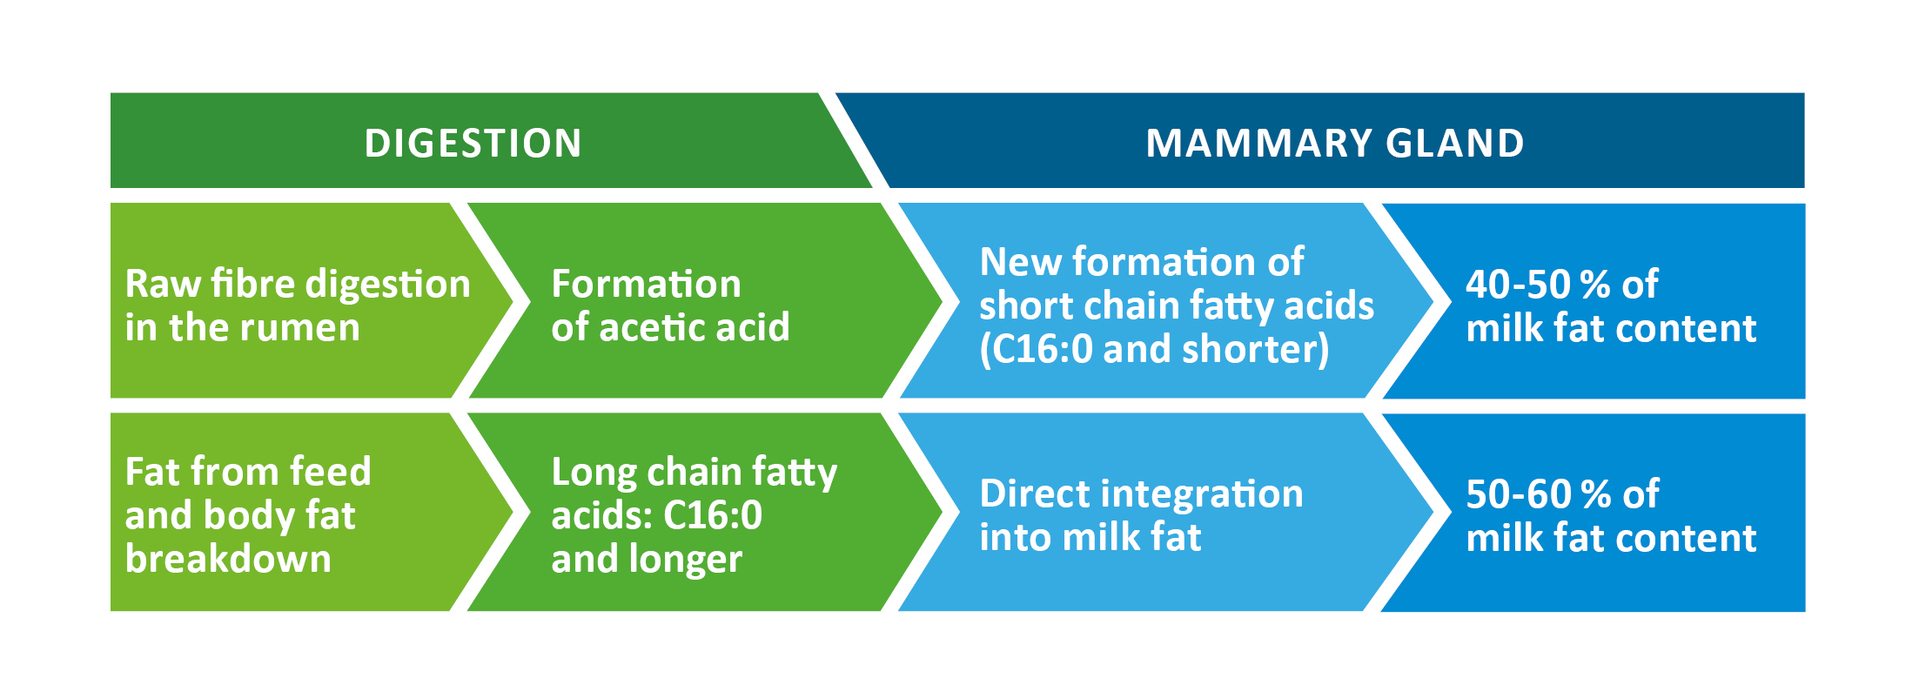 Influence of feeding on milk fat content